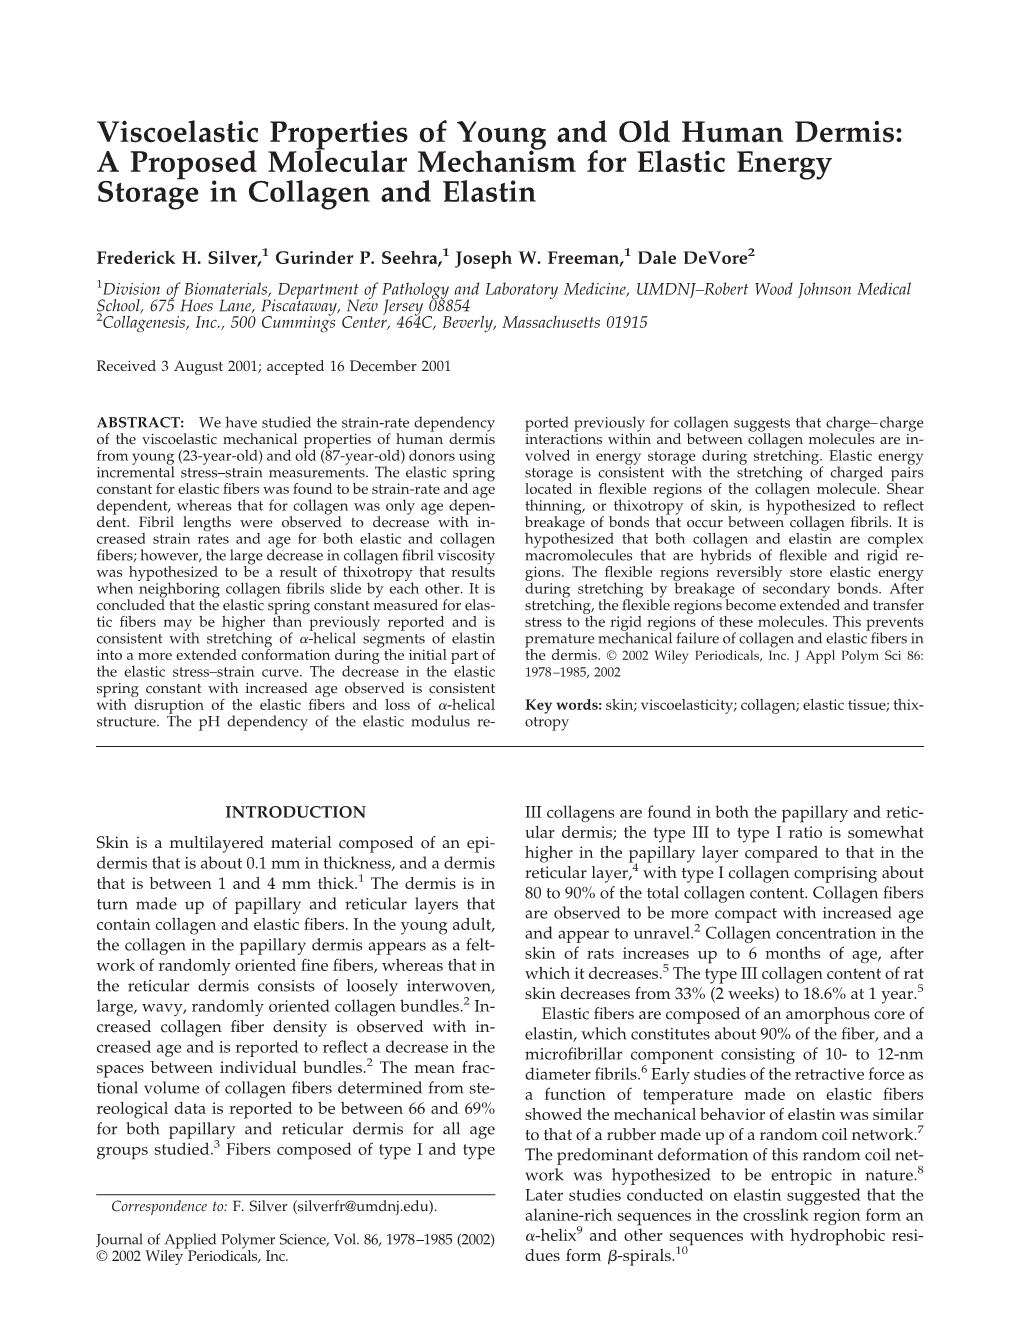 Viscoelastic Properties of Young and Old Human Dermis: a Proposed Molecular Mechanism for Elastic Energy Storage in Collagen